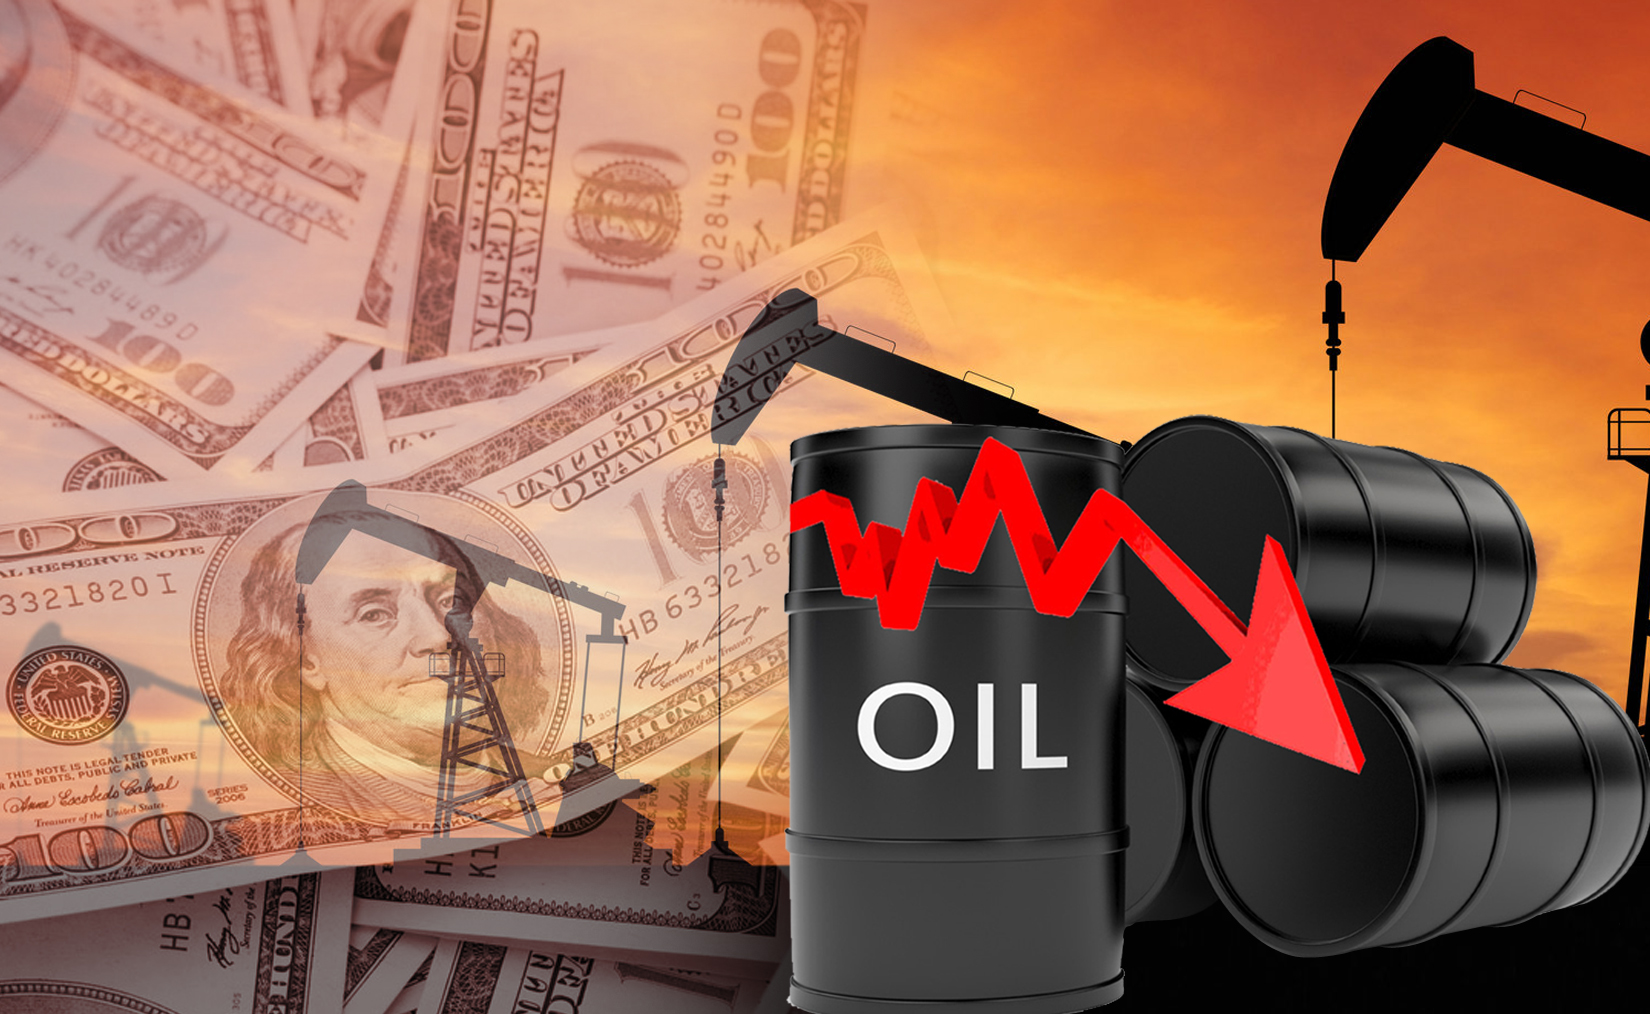 The barrel cost of Kuwaiti oil is down $ 1.79 to $ 58.63                                                                                                                                                                                                